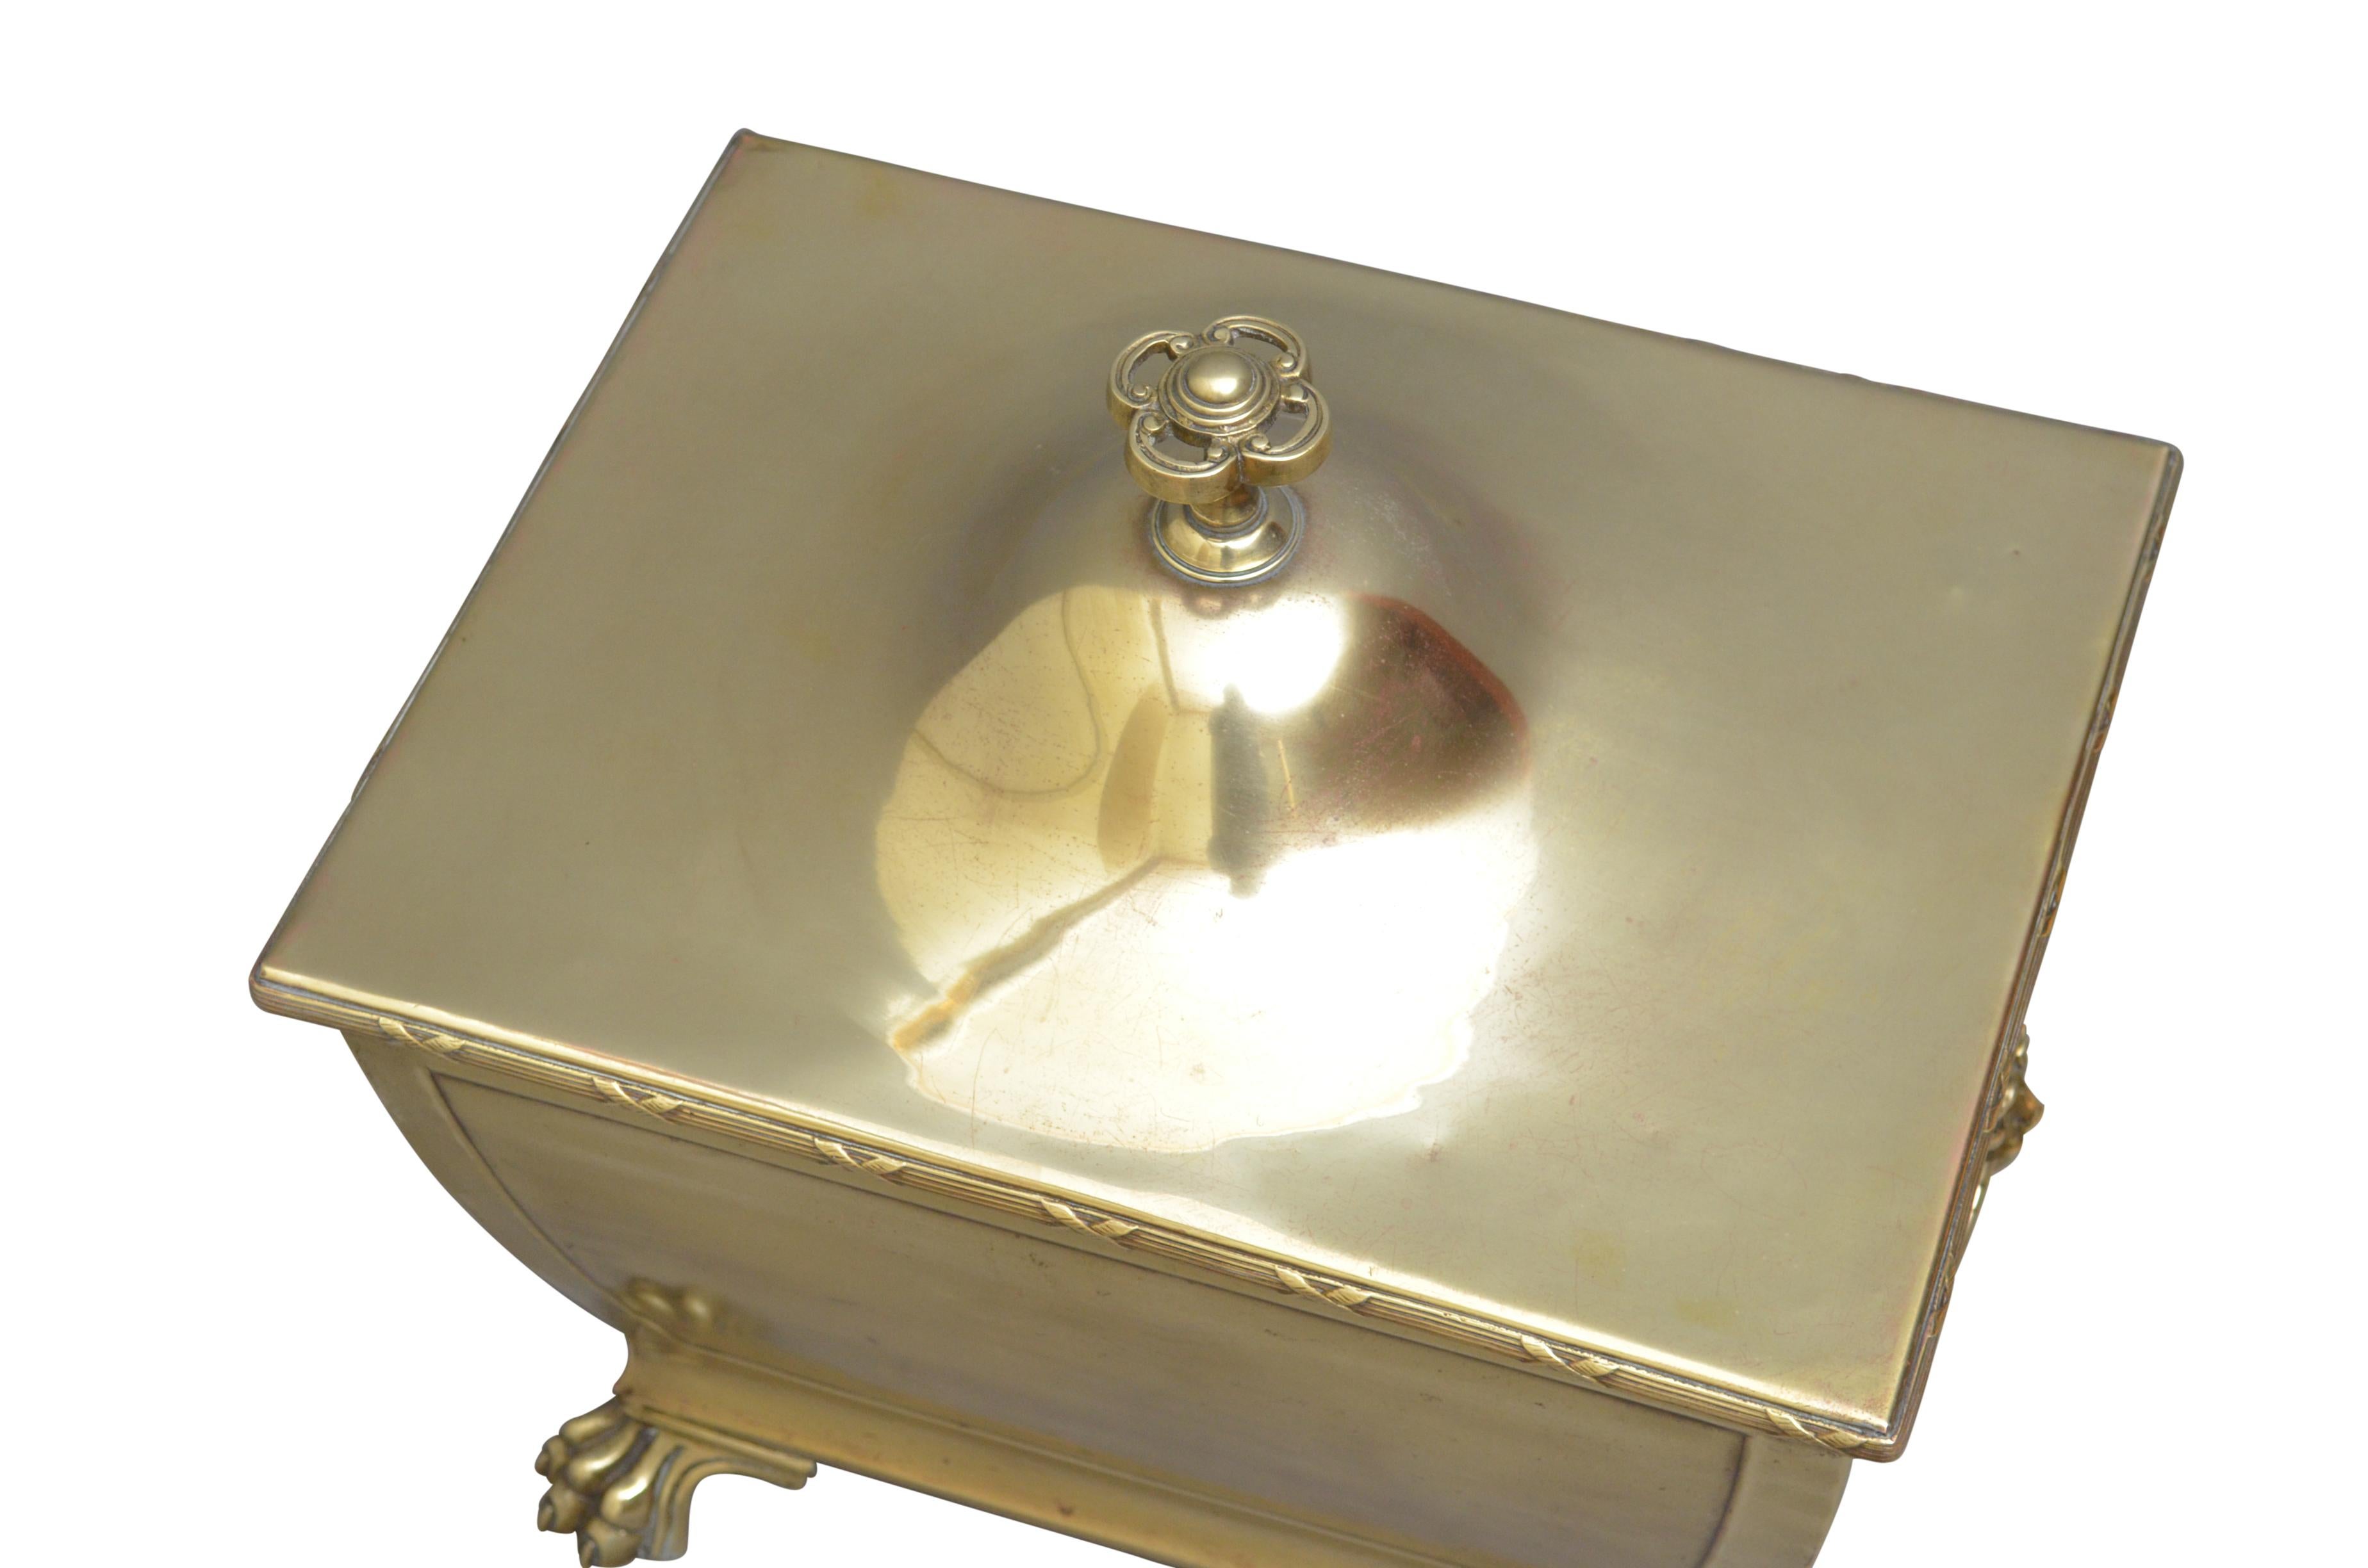 Unusual late 19th century brass coal or log bin with lift up lid enclosing original liner, lion mask carrying handles and 4 paw feet. Cleaned, polished and ready to use at home. c1890
Measures: H 18.5